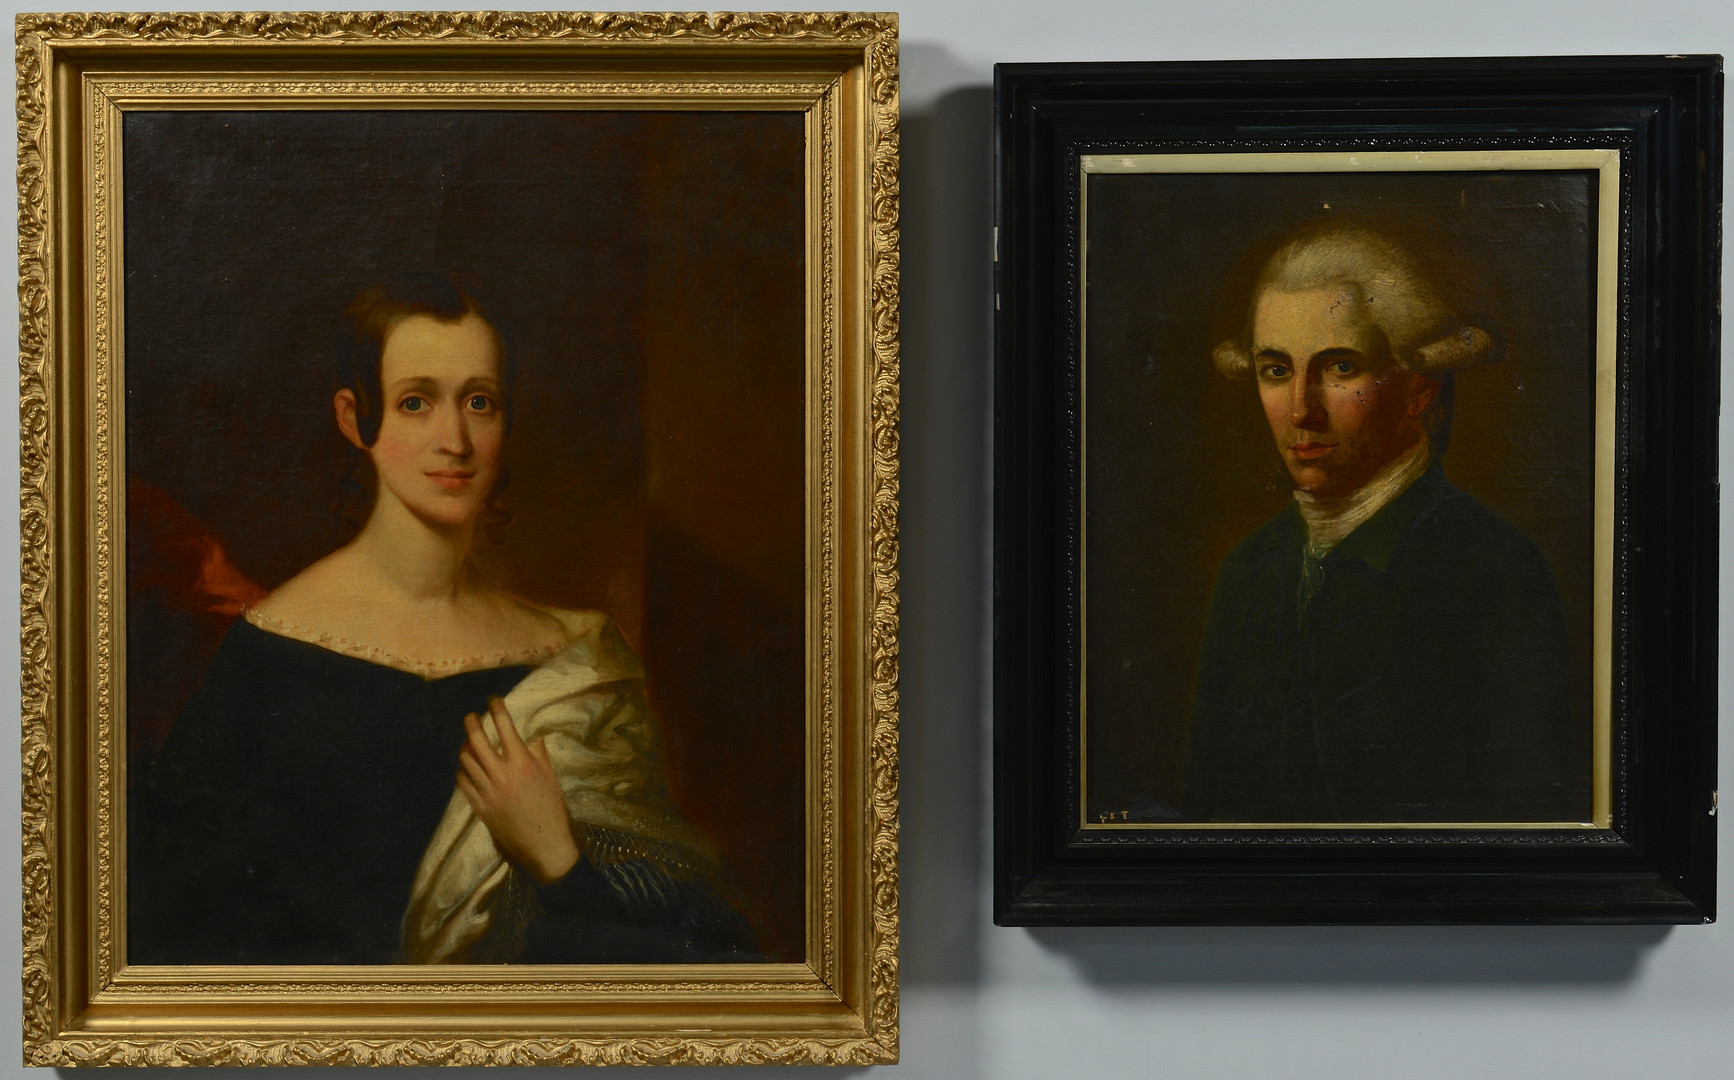 Lot 545: Portraits of a Lady and a Gentleman, 18th and 19th